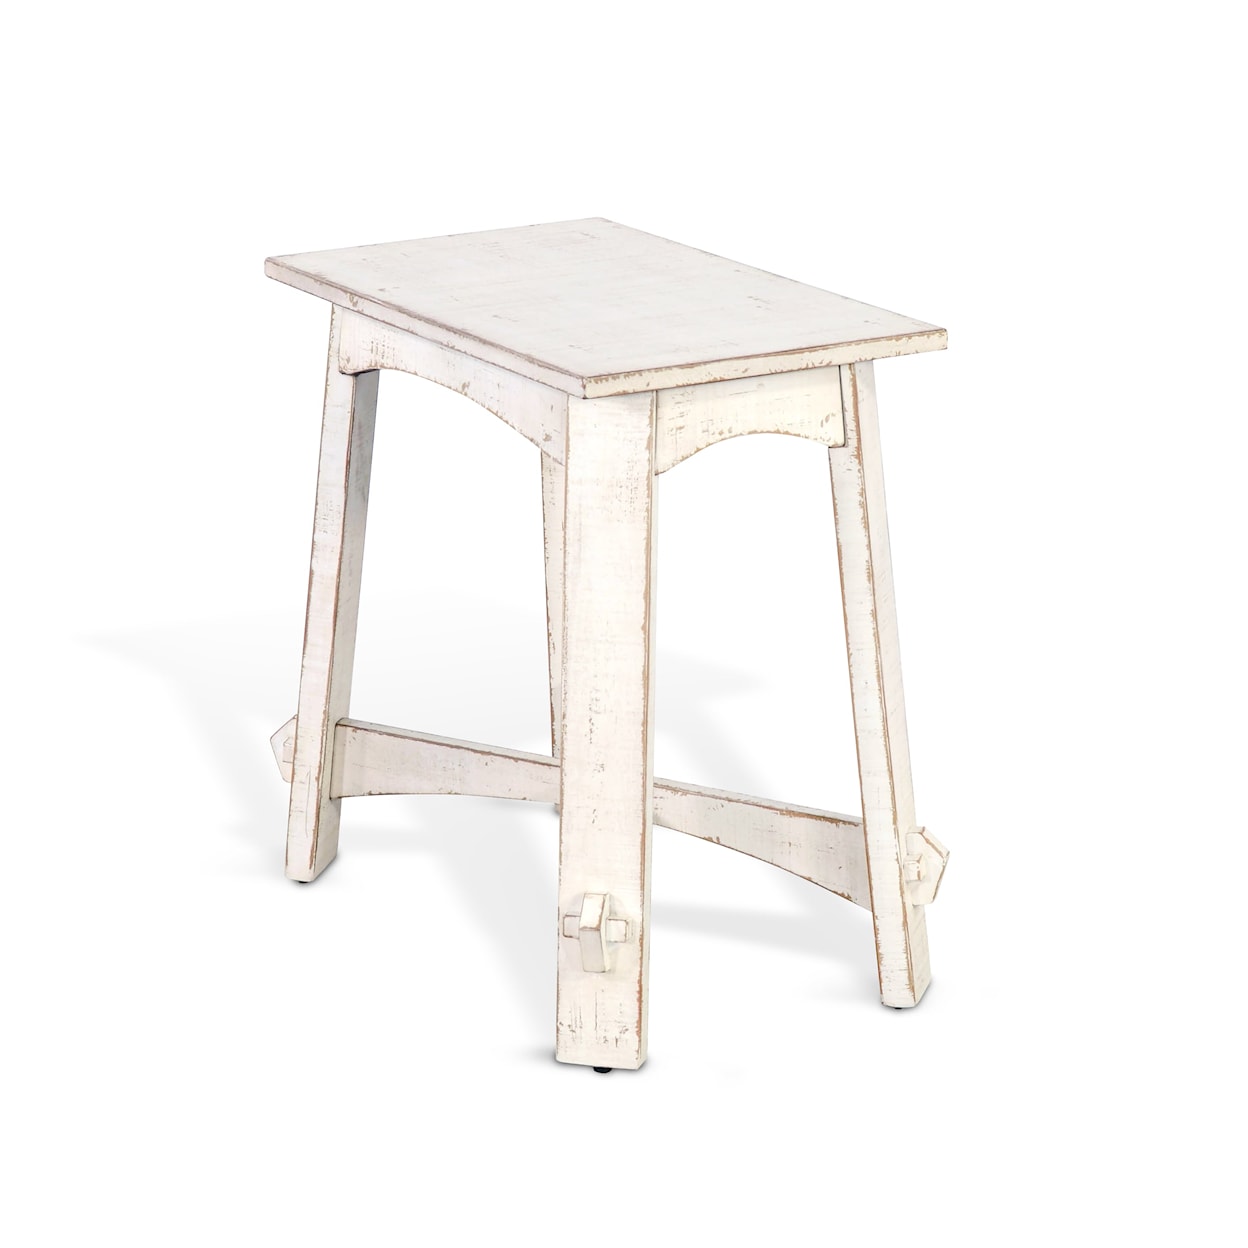 Sunny Designs Marina White Sand Chair Side Table